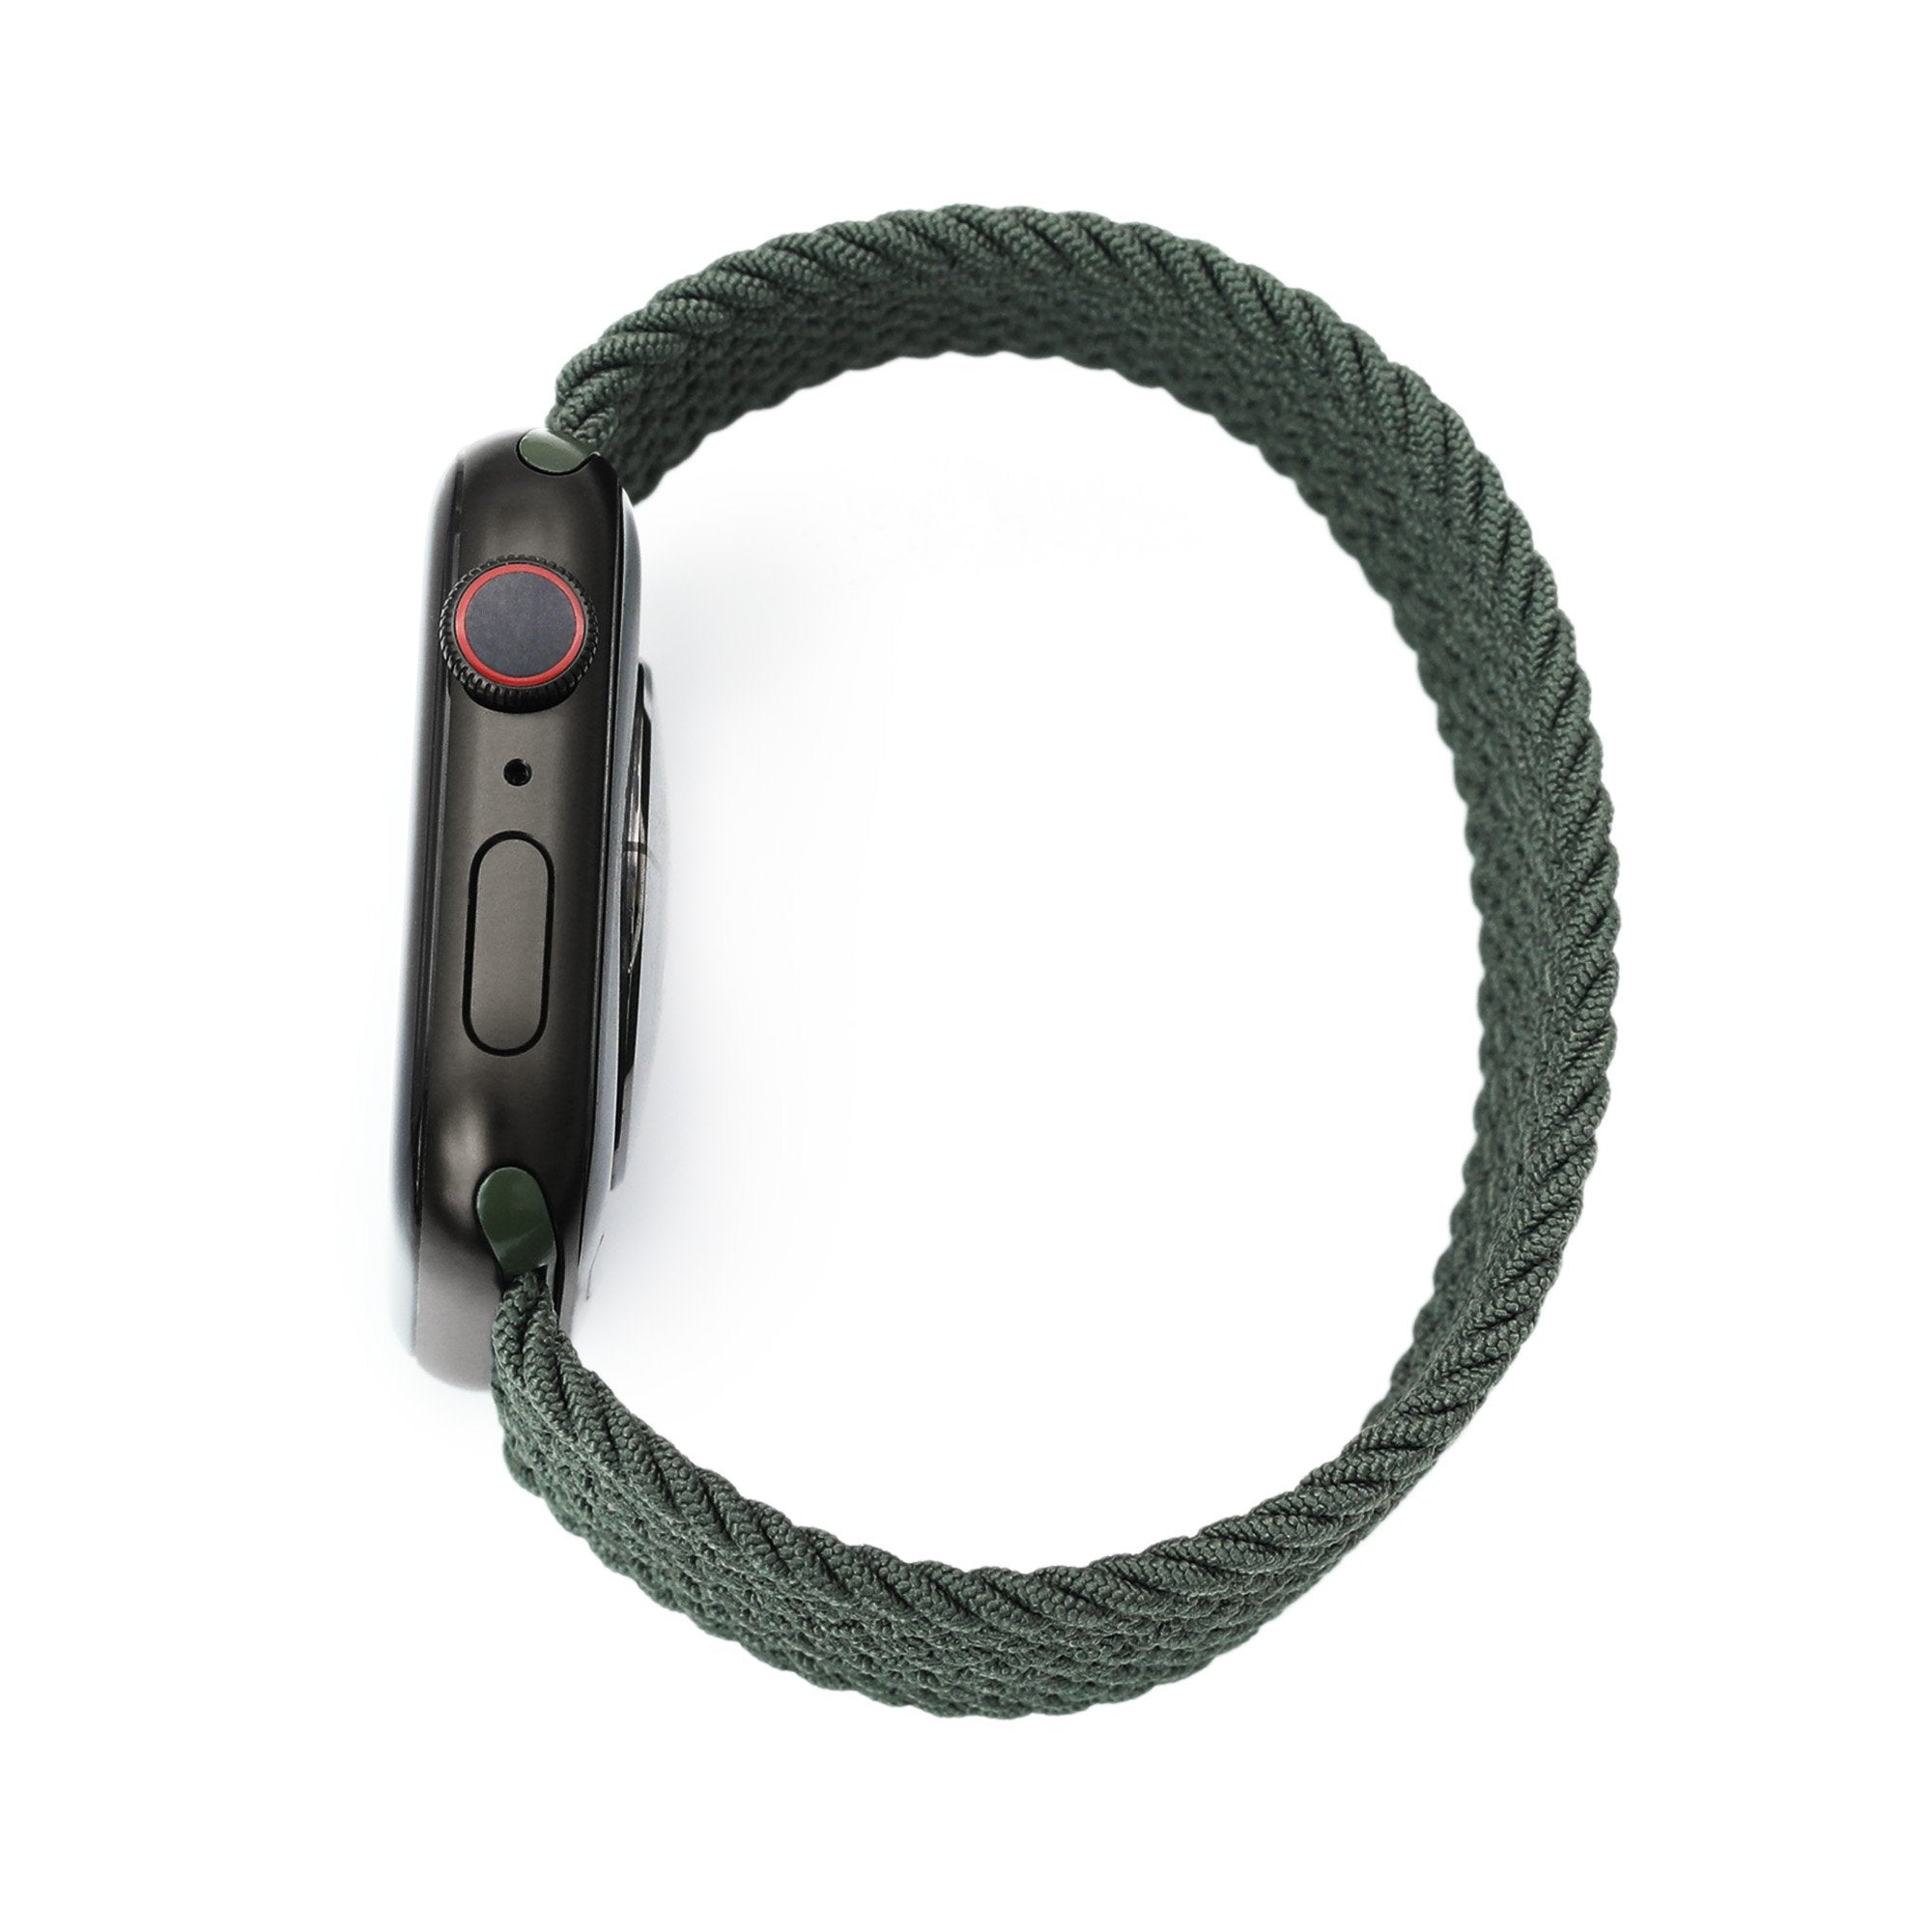 Range Leather Co Riveted Apple Watch Band